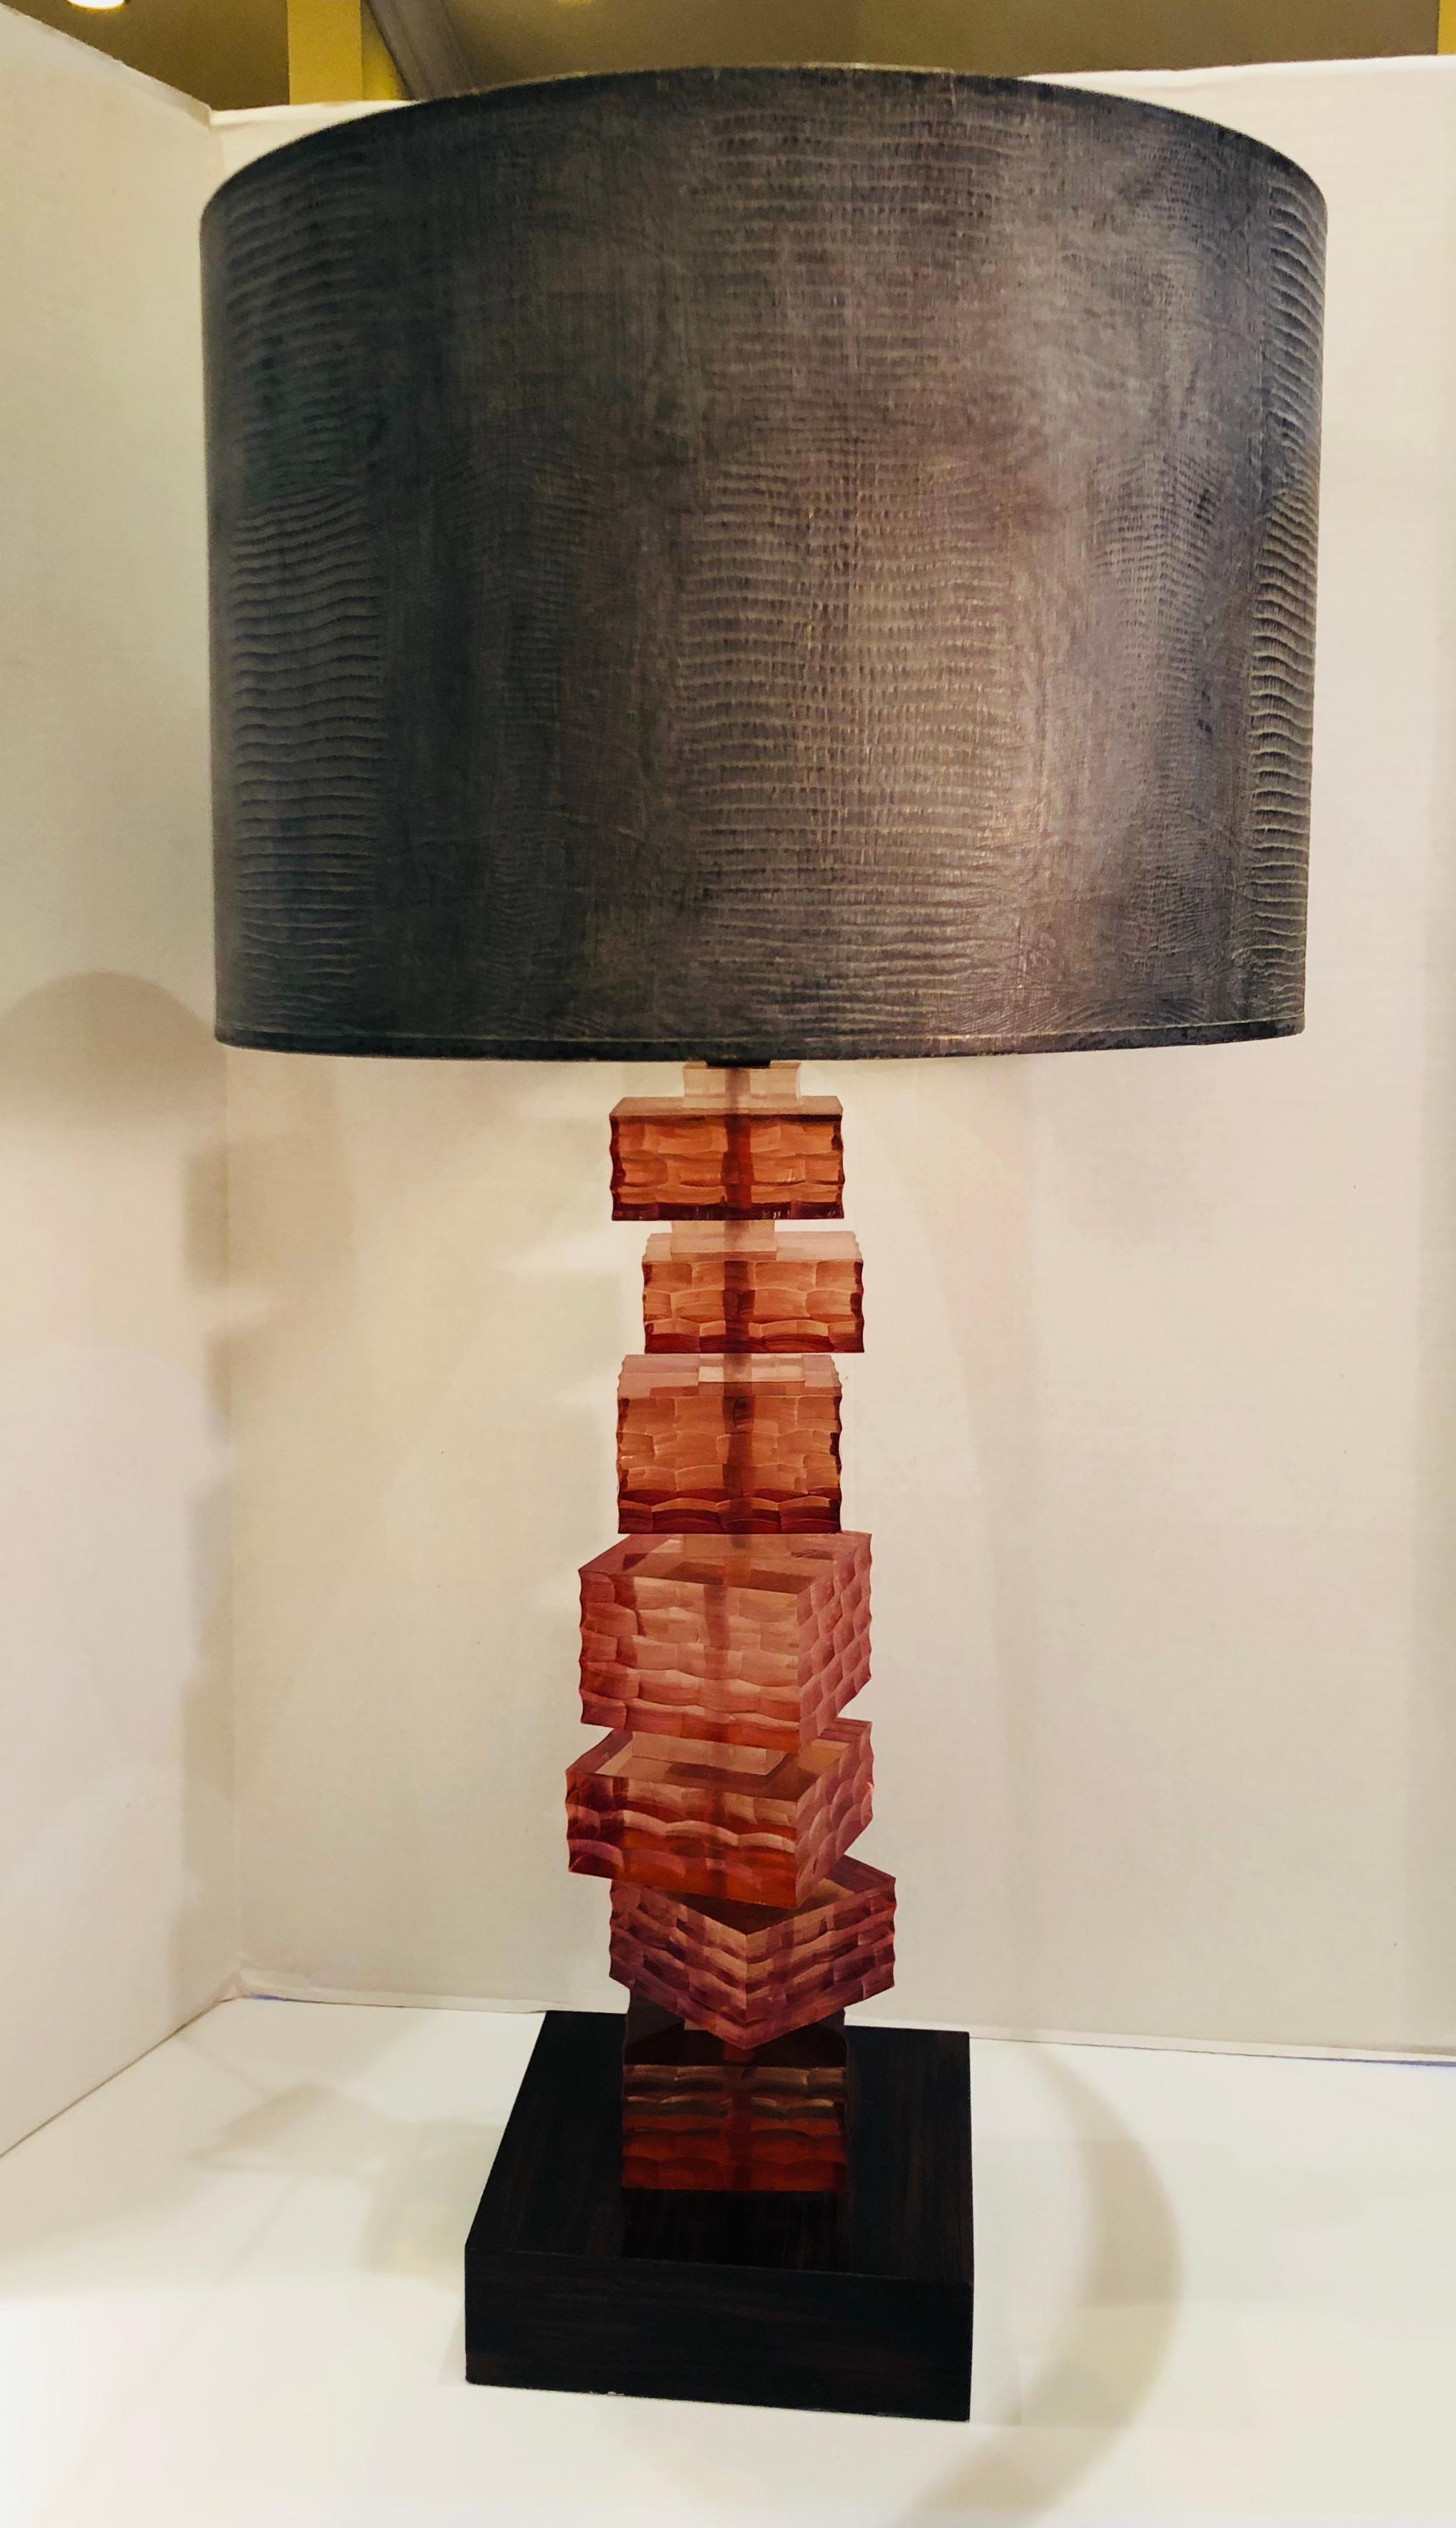 Striking acrylic lamp was pictured in architectural digest magazine and is a work of art!

Chic modernist table lamp features a stack of 7 honeycomb textured Lucite blocks of varying sizes in a cognac amber color, alternating with 7 smaller Lucite